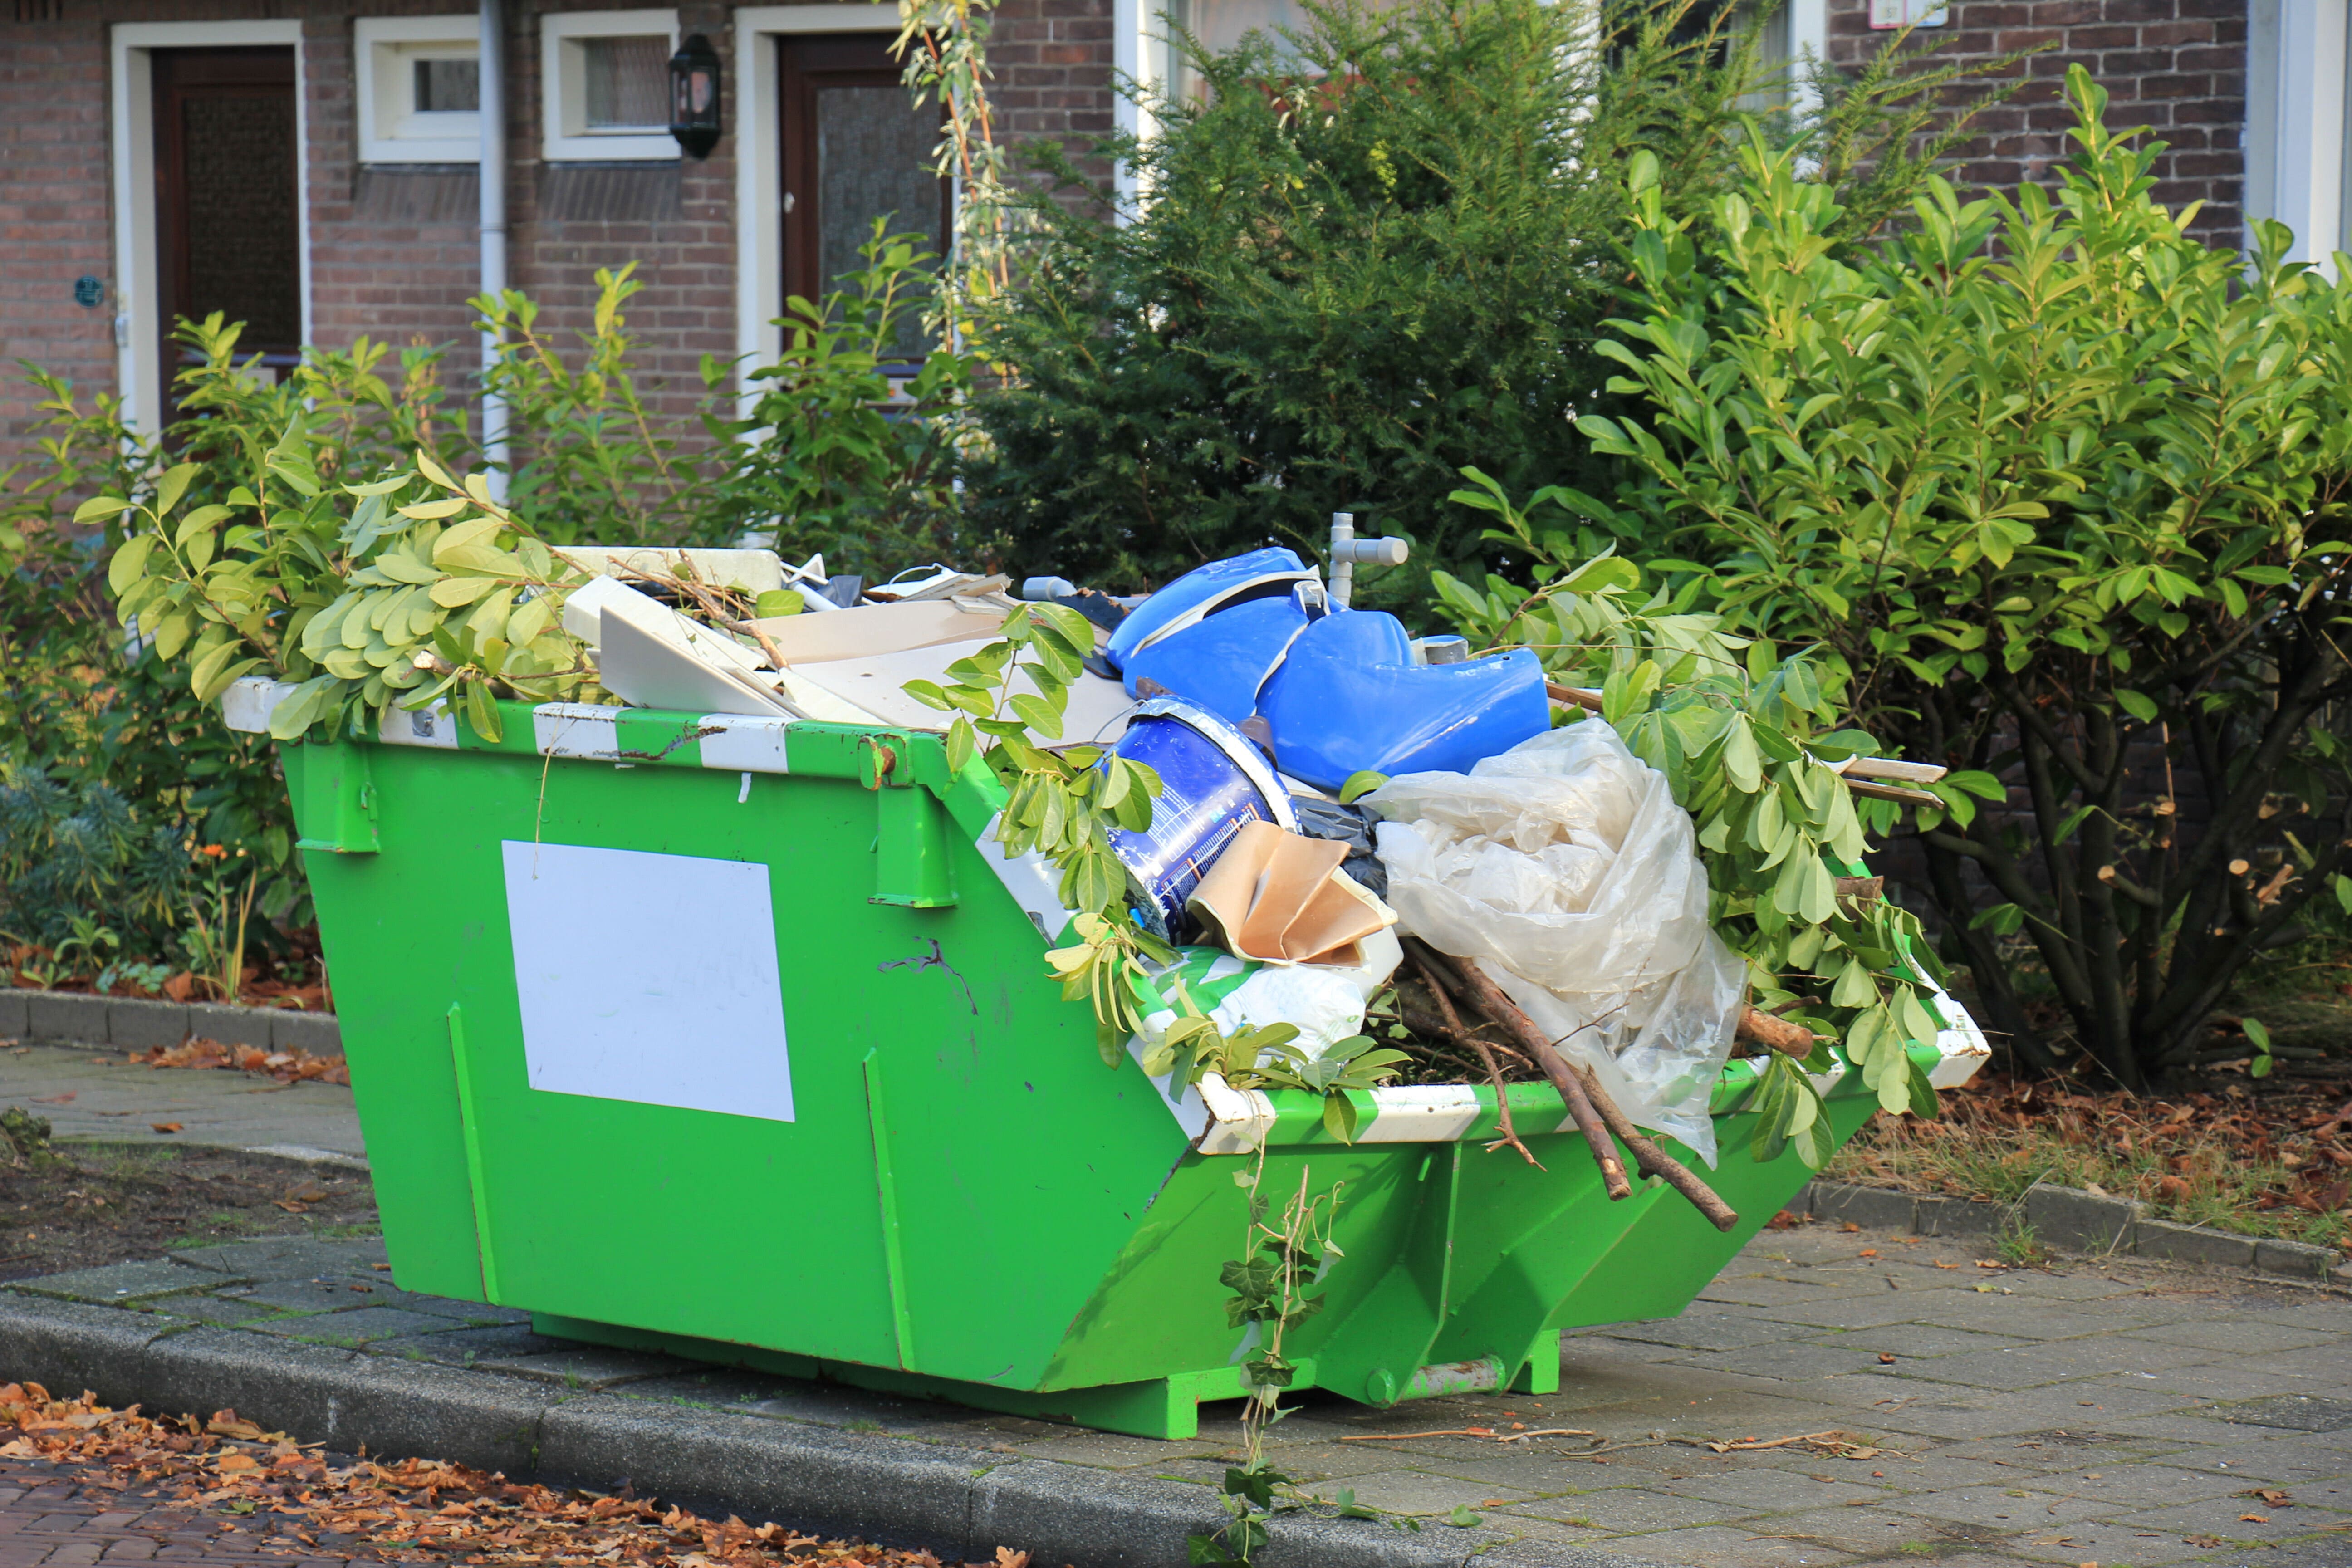 How to ensure your skip hire is ready for collection